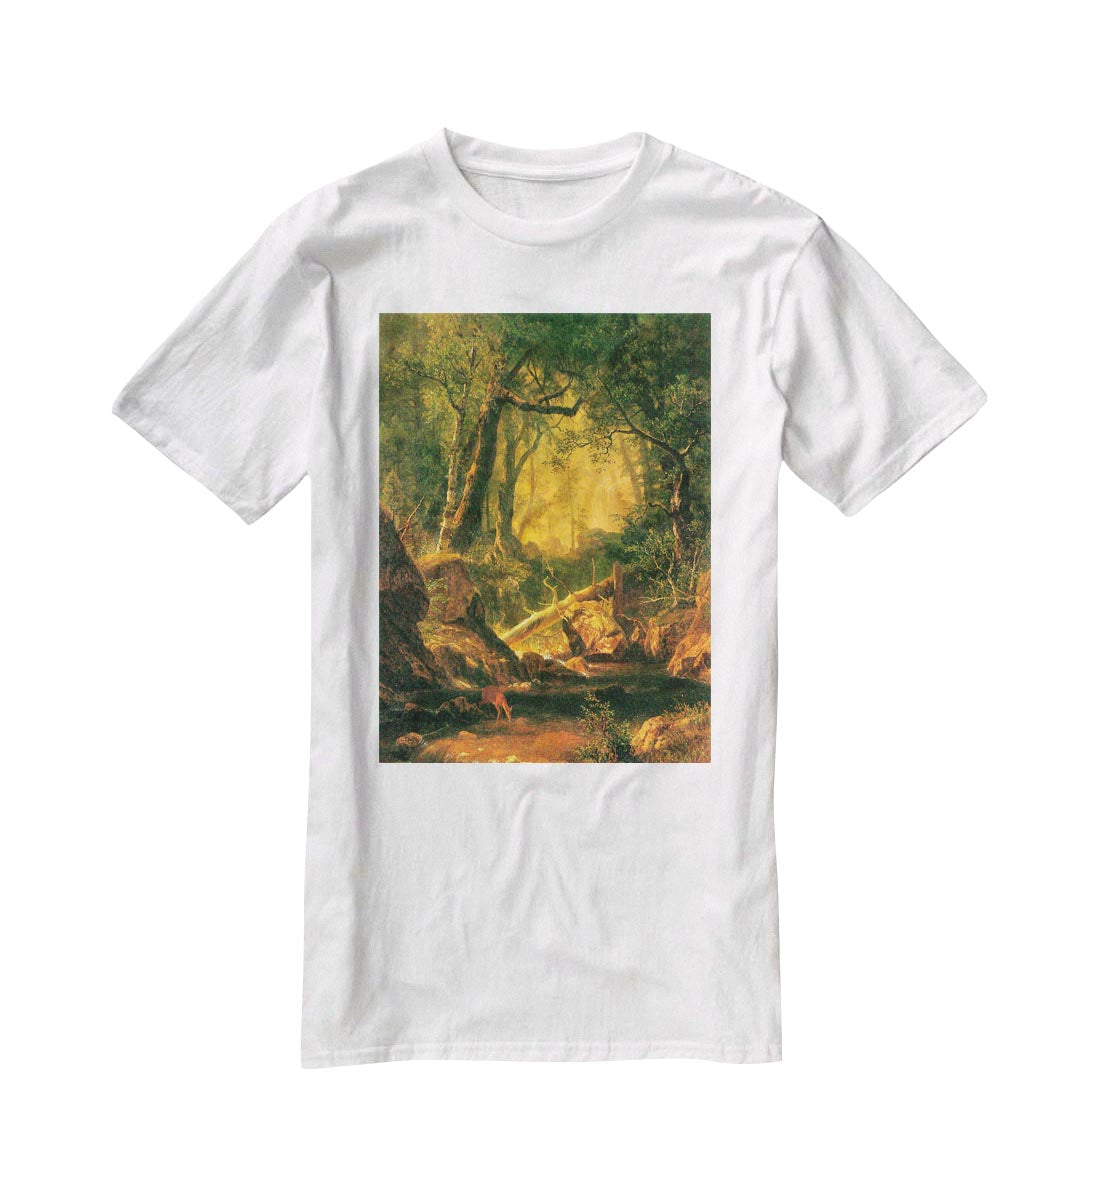 White Mountains New Hampshire 2 by Bierstadt T-Shirt - Canvas Art Rocks - 5